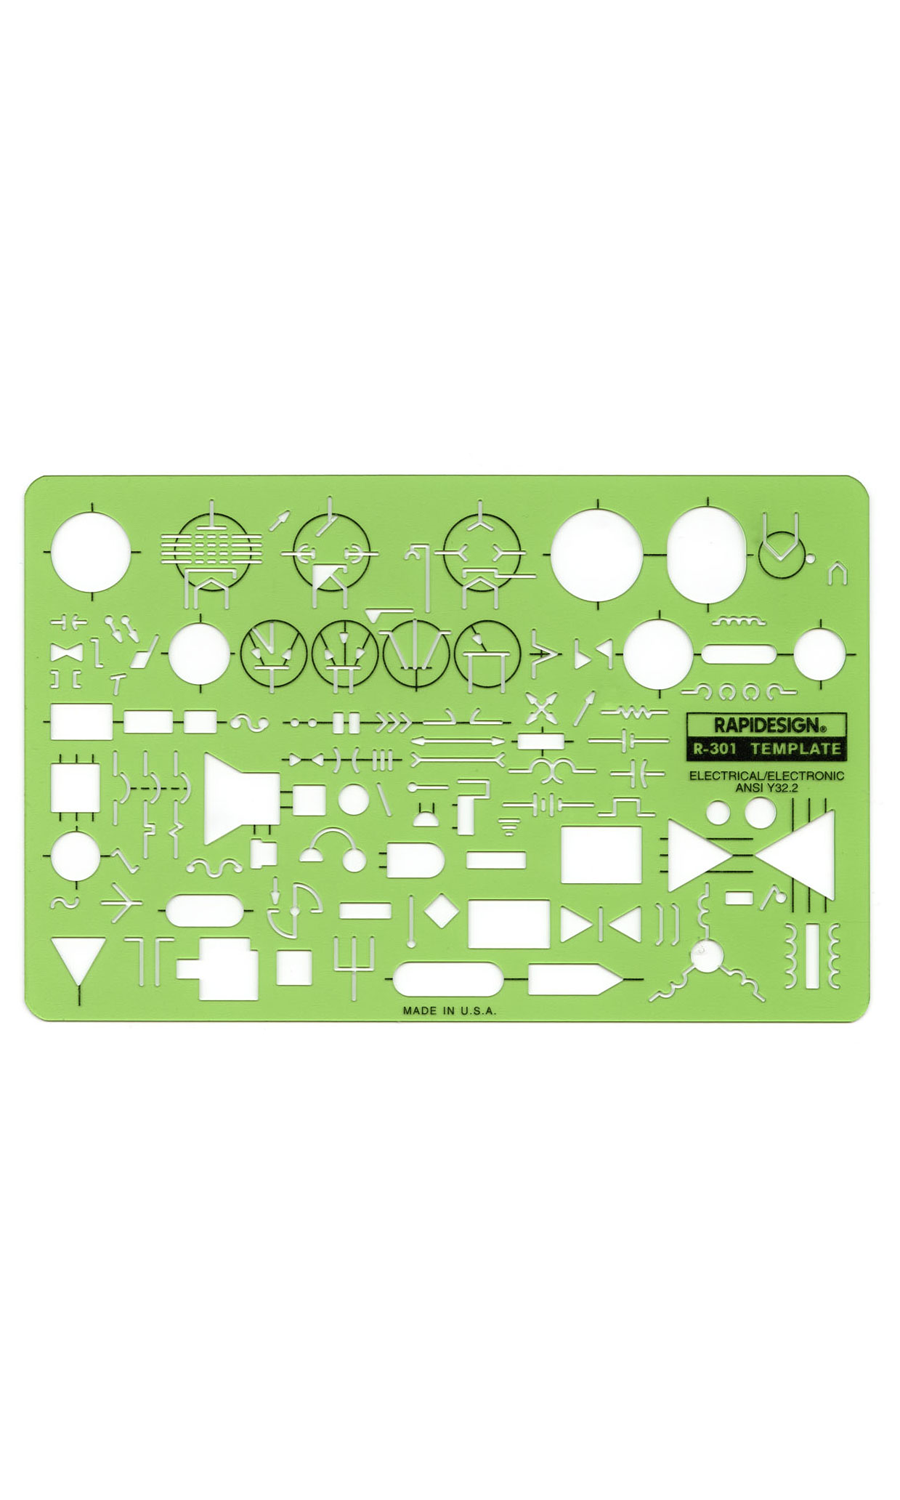 Rapidesign? Standard Electrical/Electronic Template